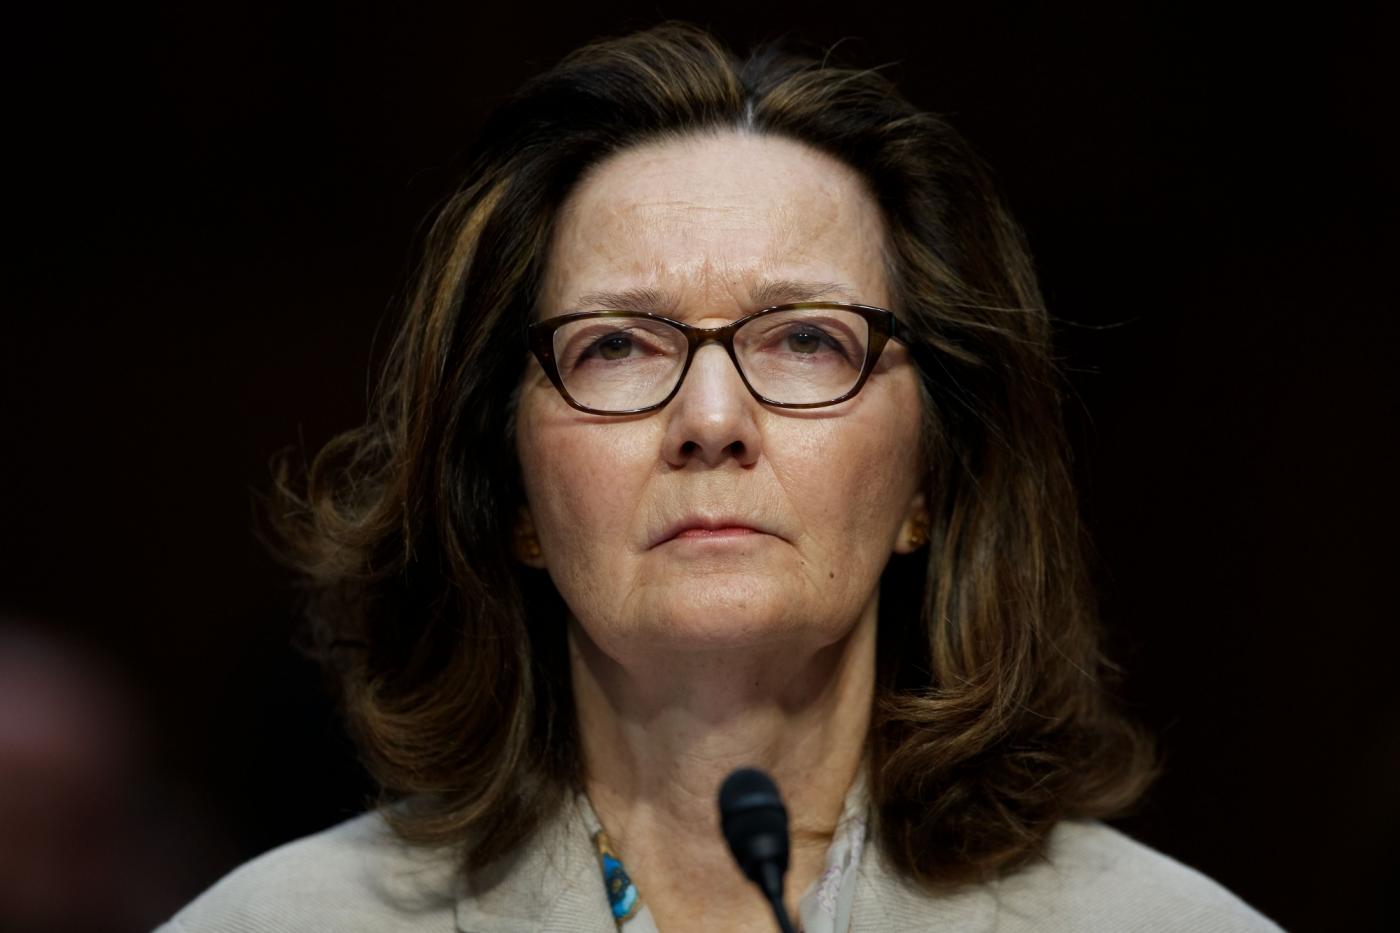 WASHINGTON, May 9, 2018 (Xinhua) -- Gina Haspel, nominee for Director of Central Intelligence Agency, testifies at her confirmation hearing before the Senate Intelligence Committee on Capitol Hill in Washington D.C., the United States, on May 9, 2018. (Xinhua/Ting Shen/IANS) by .